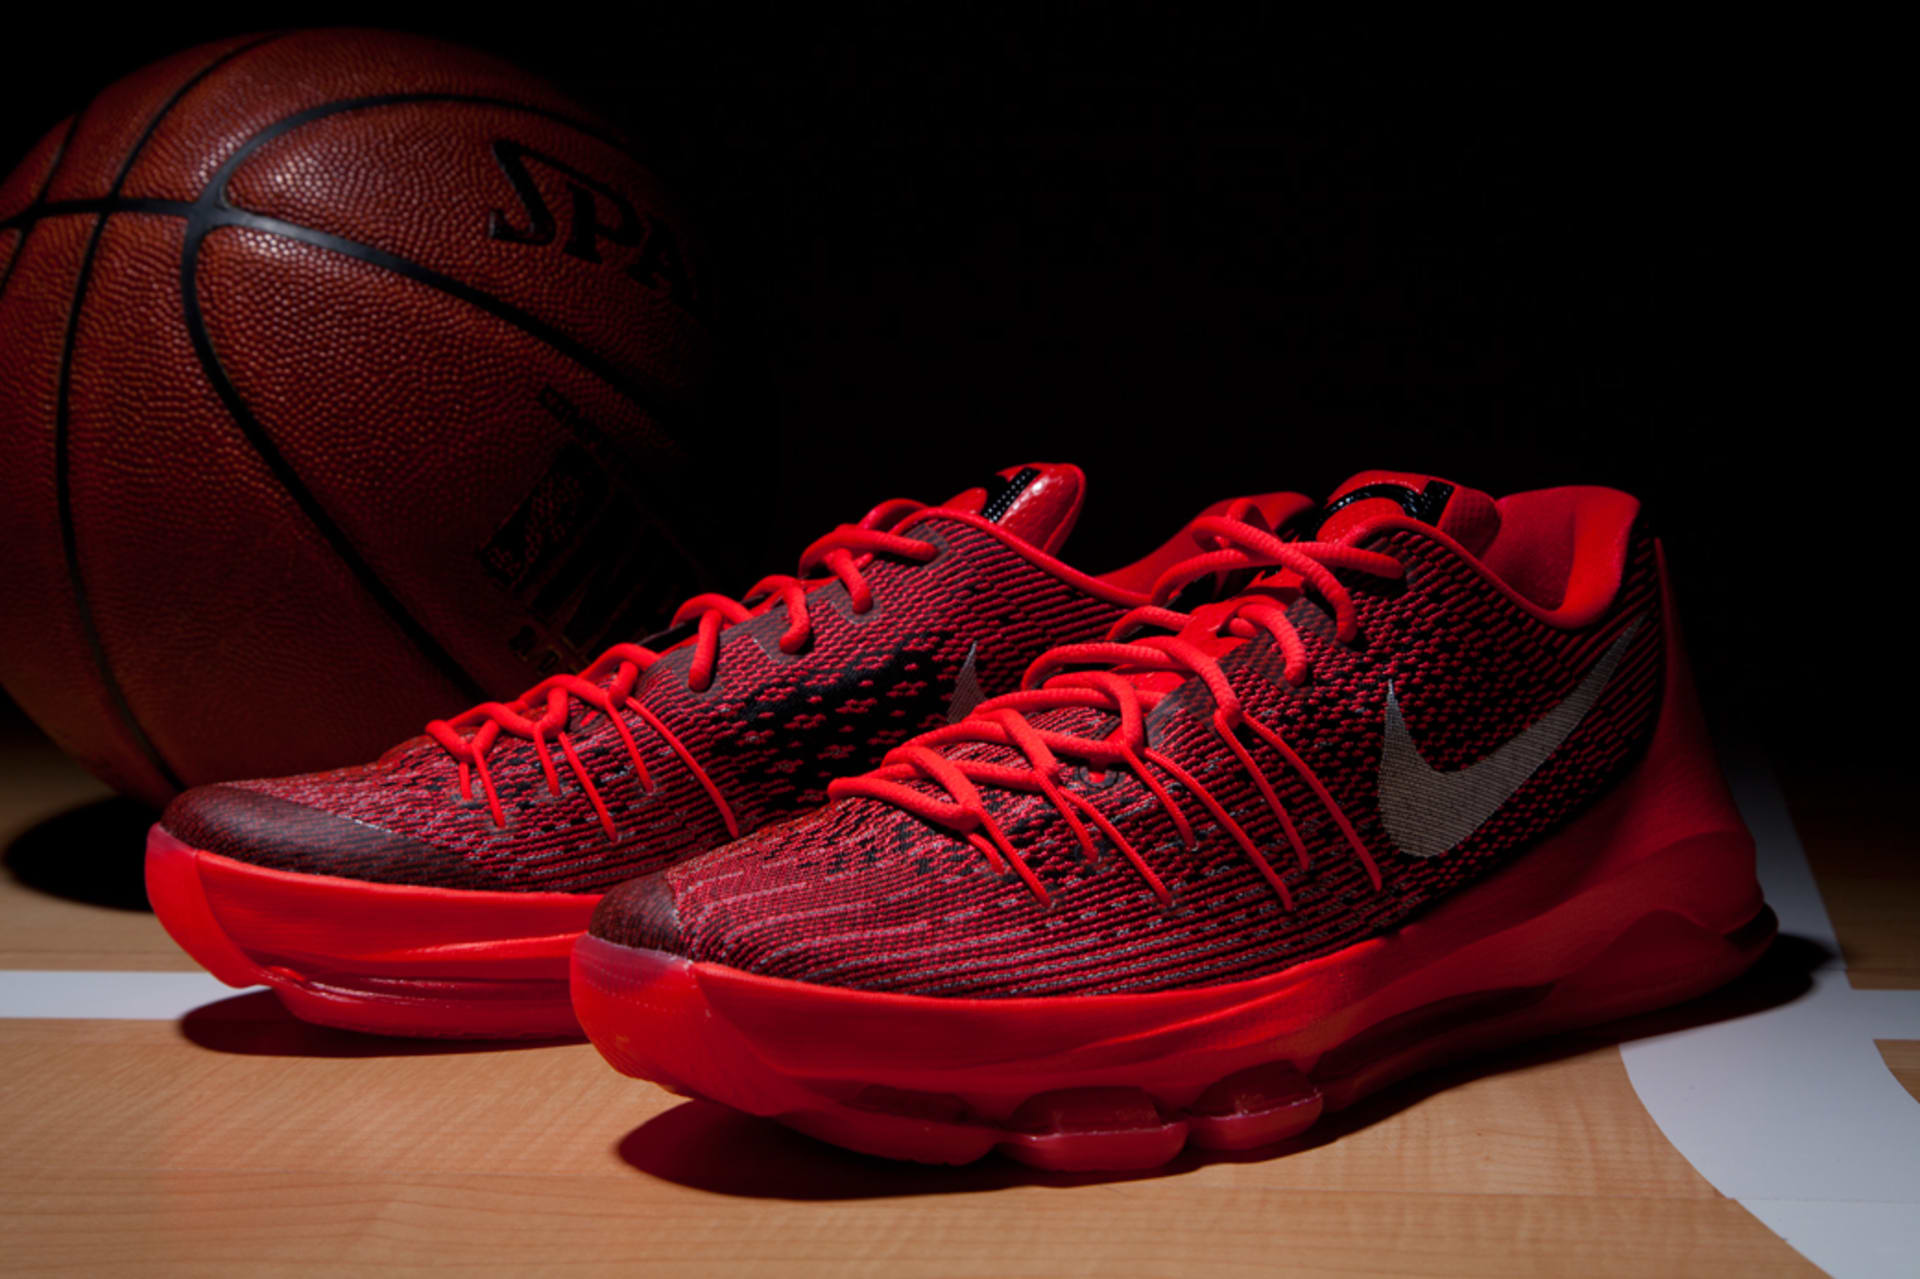 Nike's Kevin Durant Signature Shoes